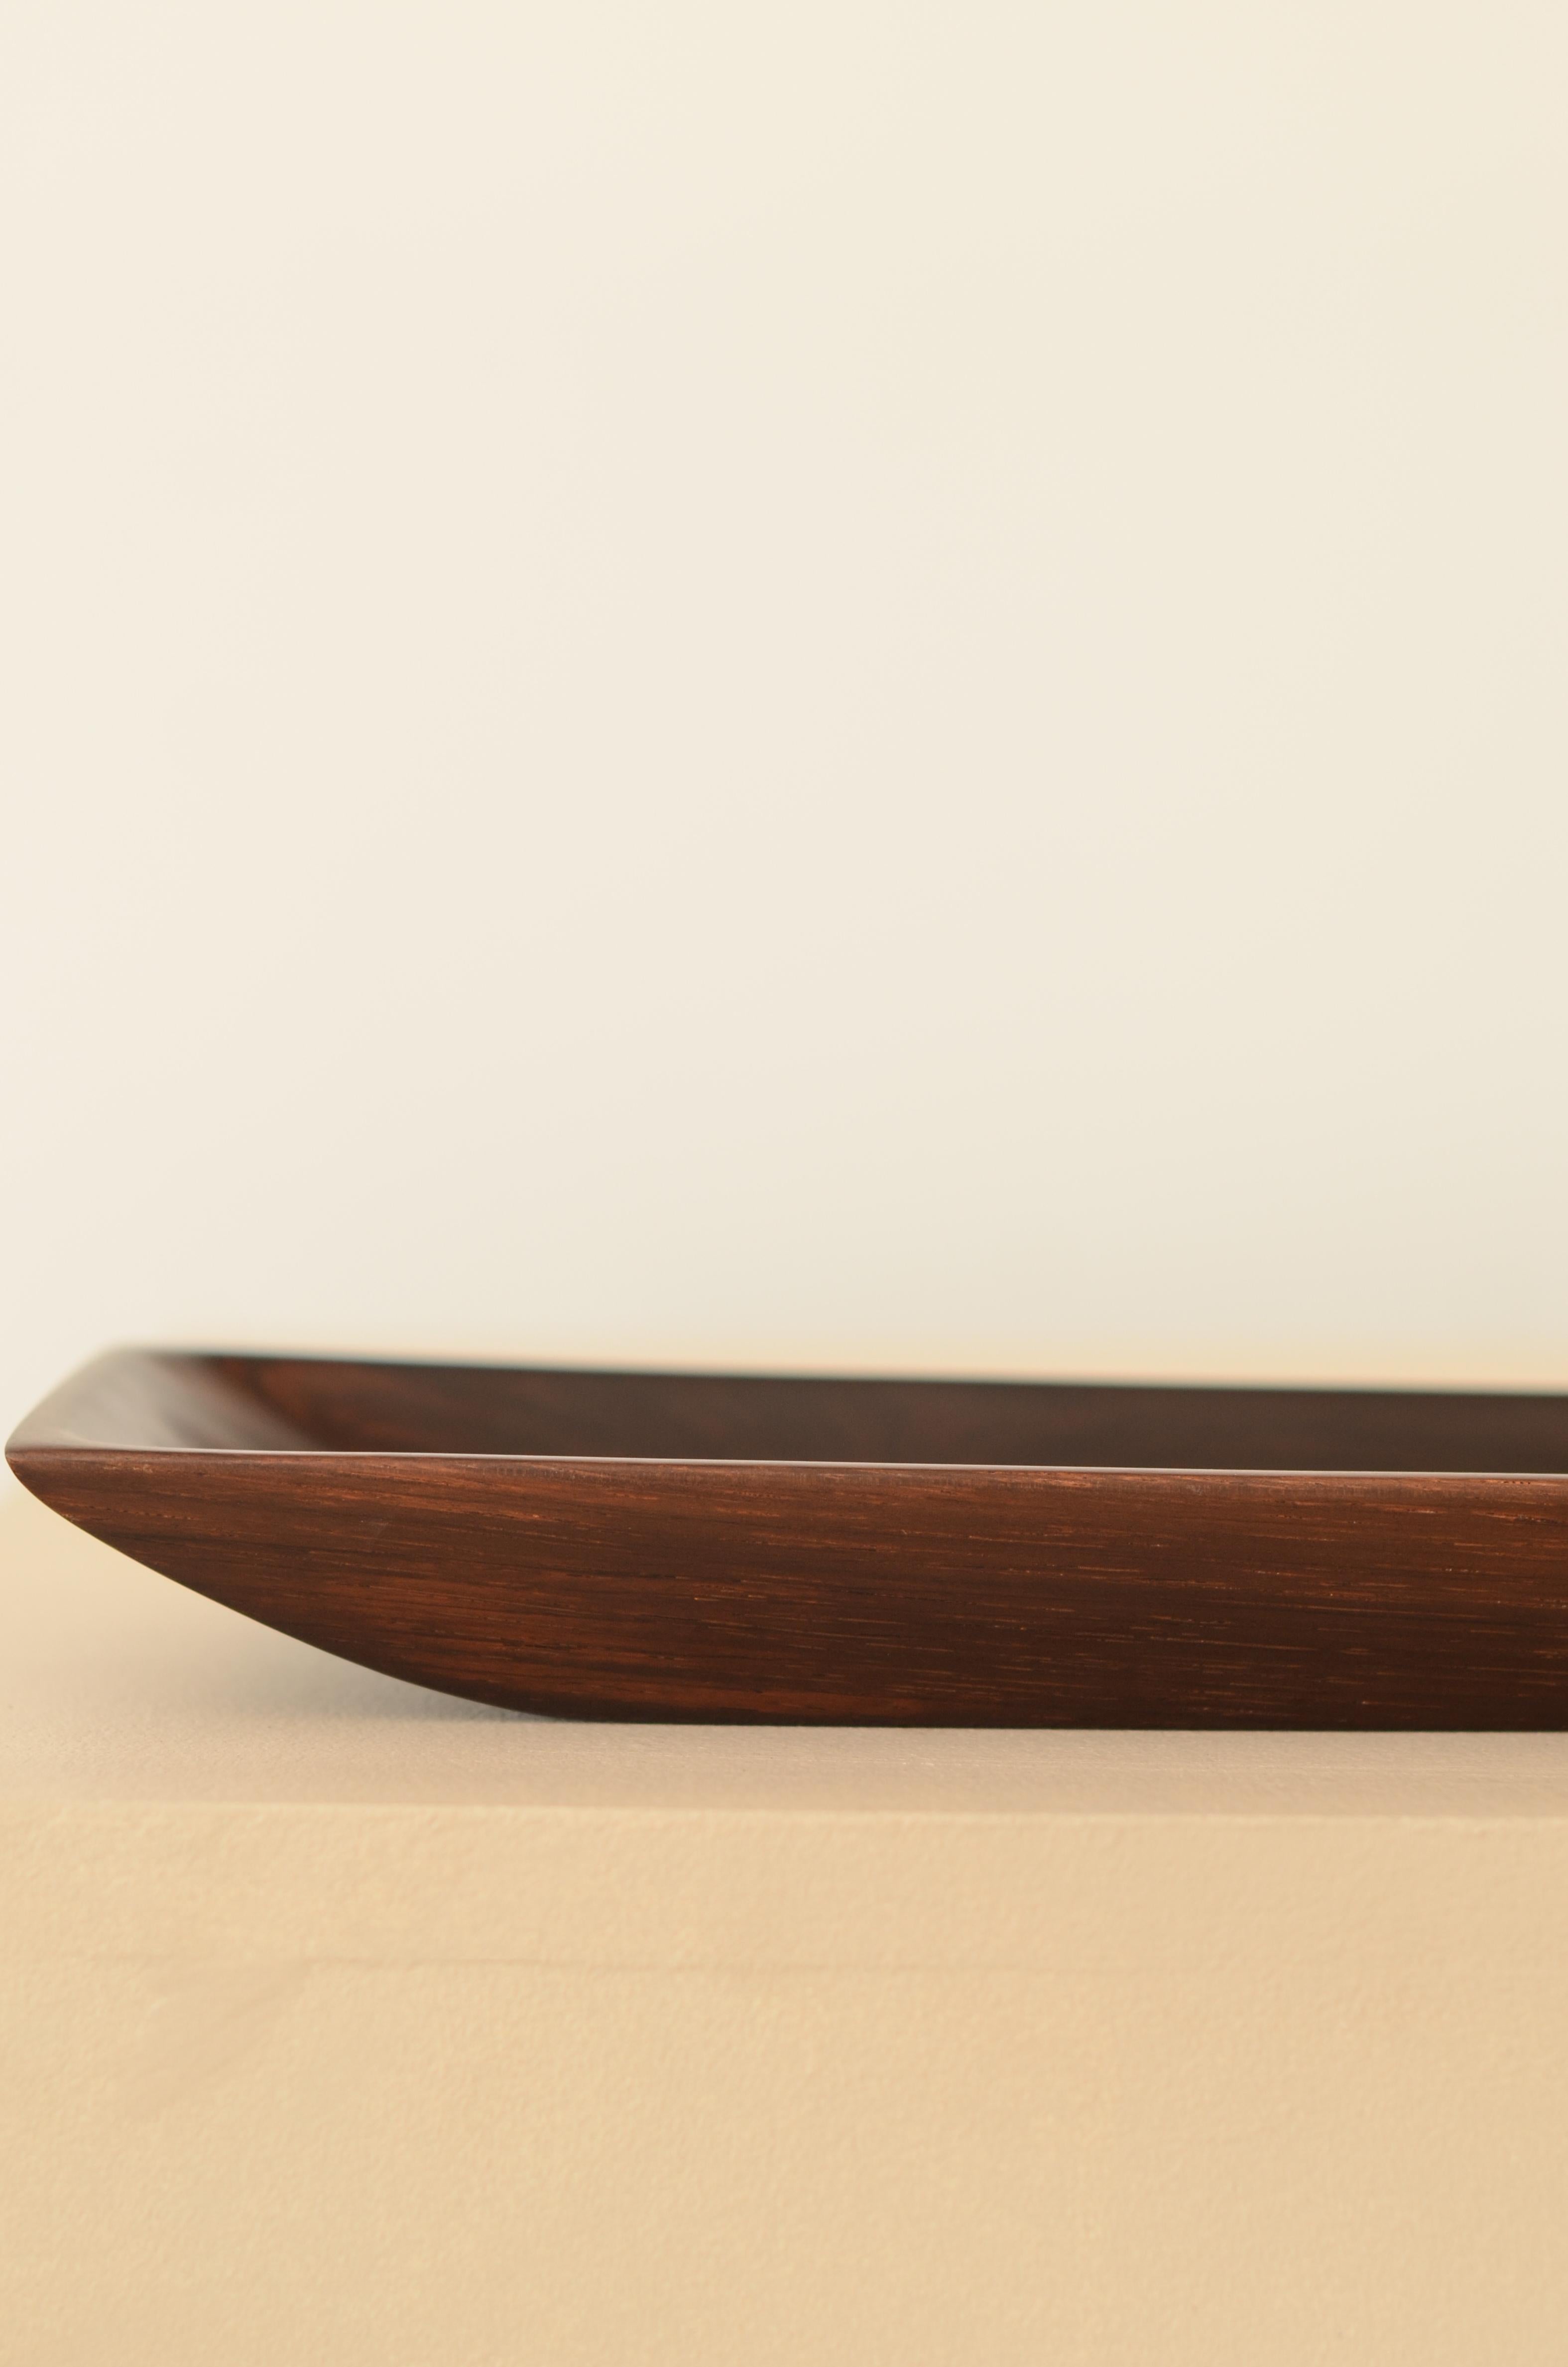 20th Century Brazilian Midcentury Tray #506 in Noble Wood by WoodArt For Sale